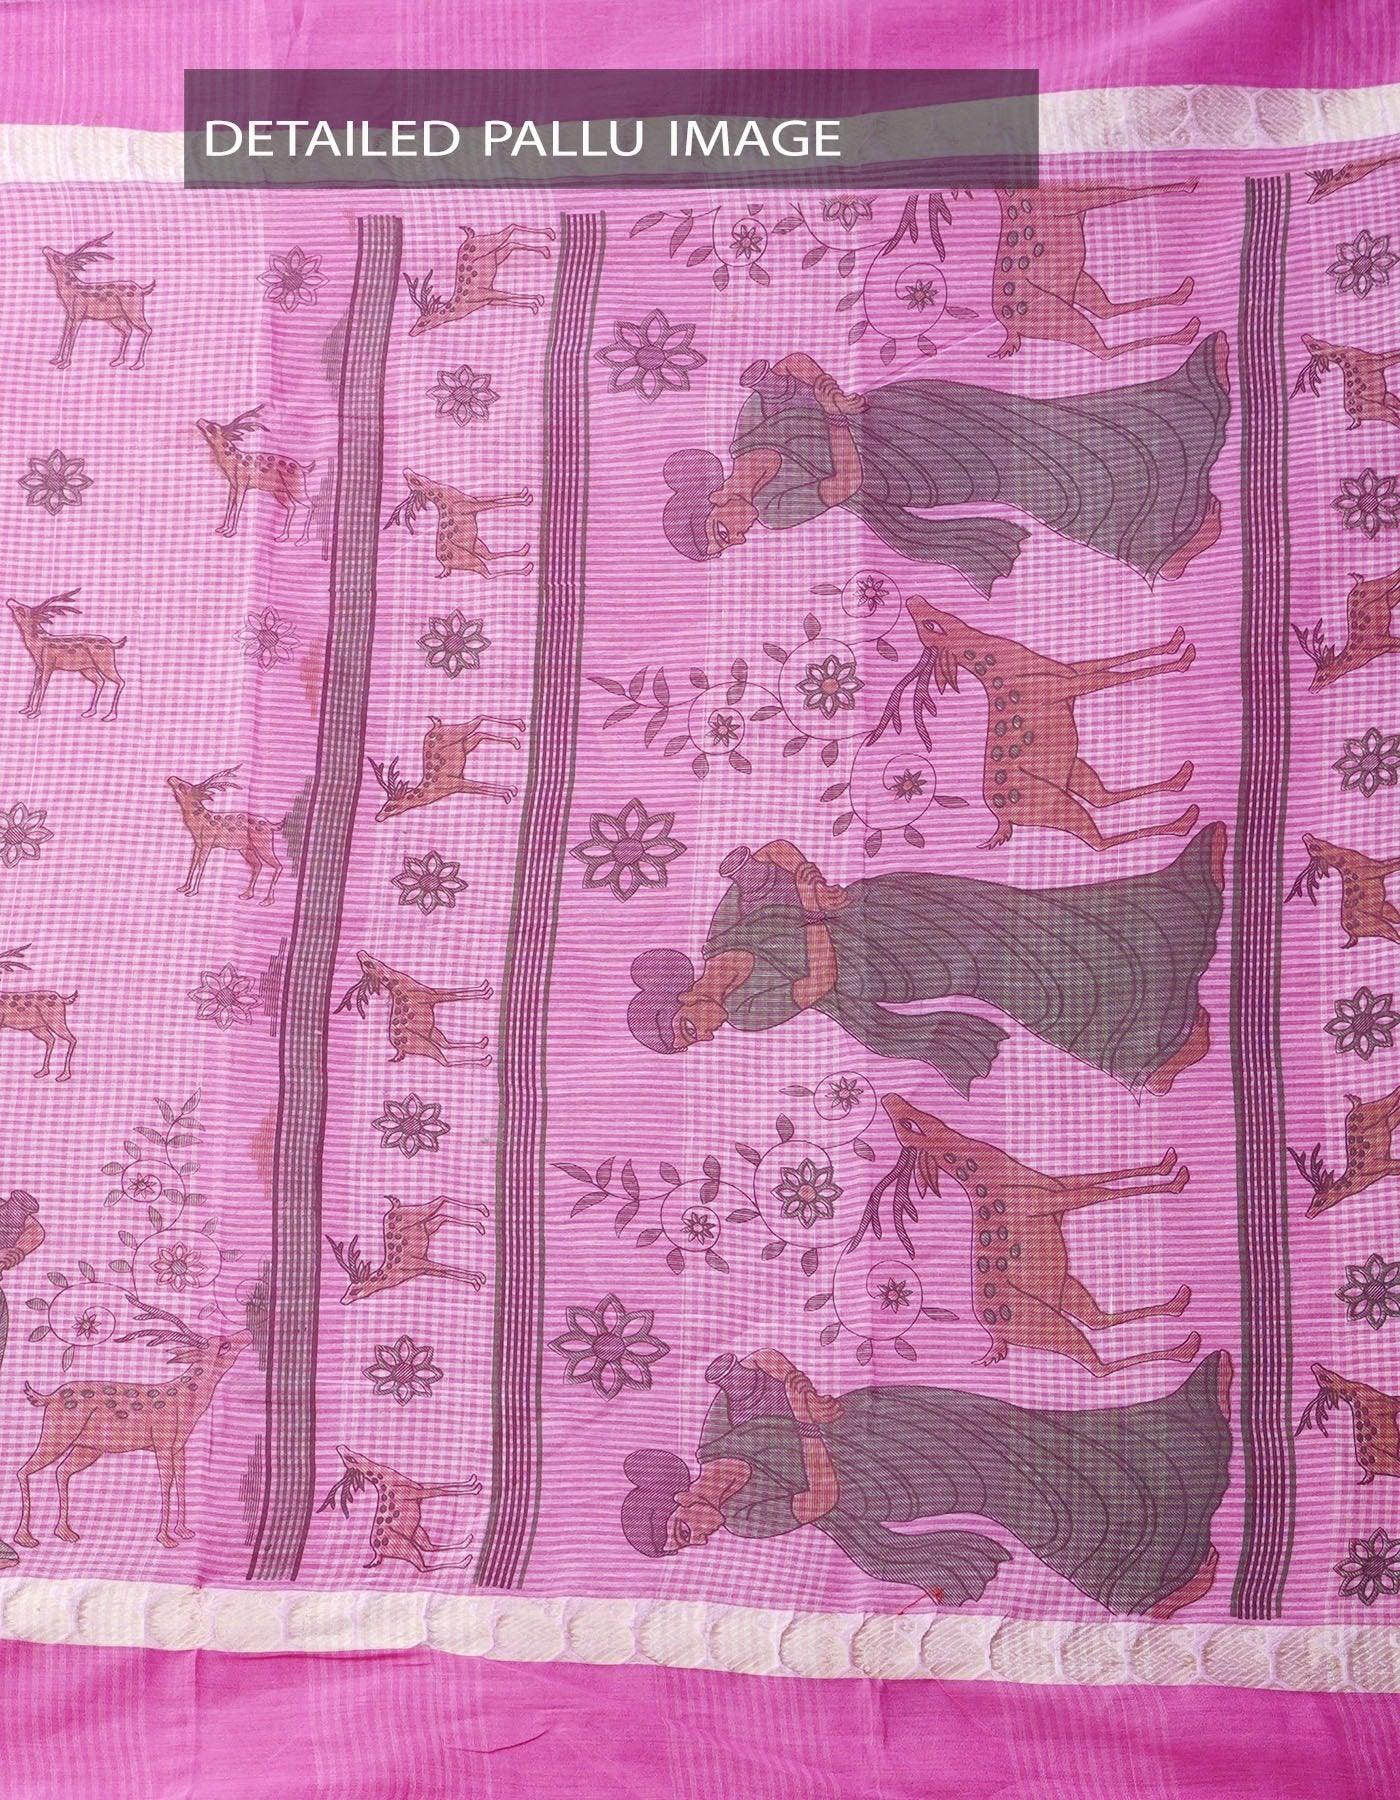 Sophisticated Baby Pink Colored Festive Wear Linen Designer Saree - Ibis Fab